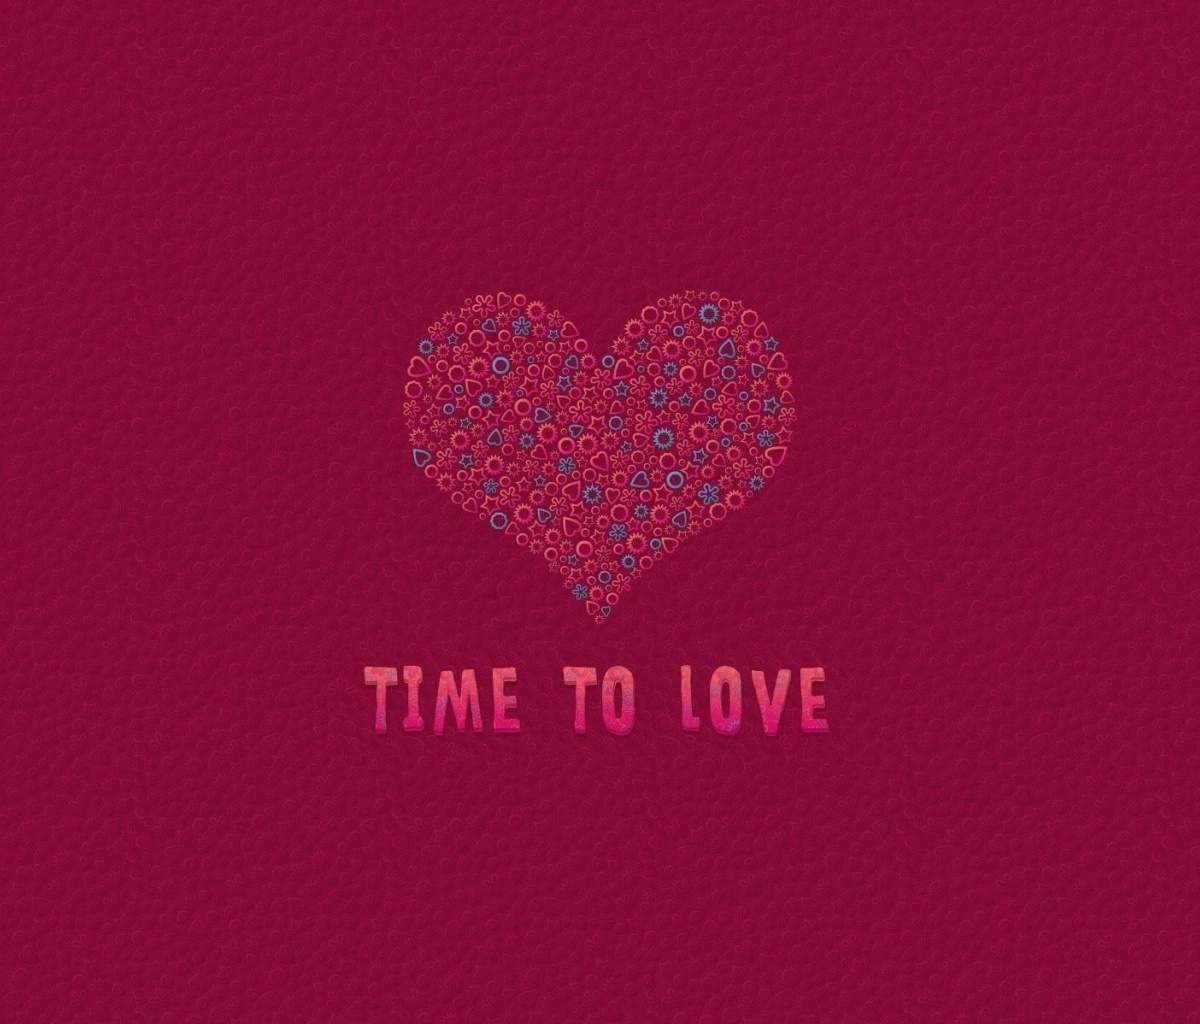 Time to Love wallpaper 1200x1024